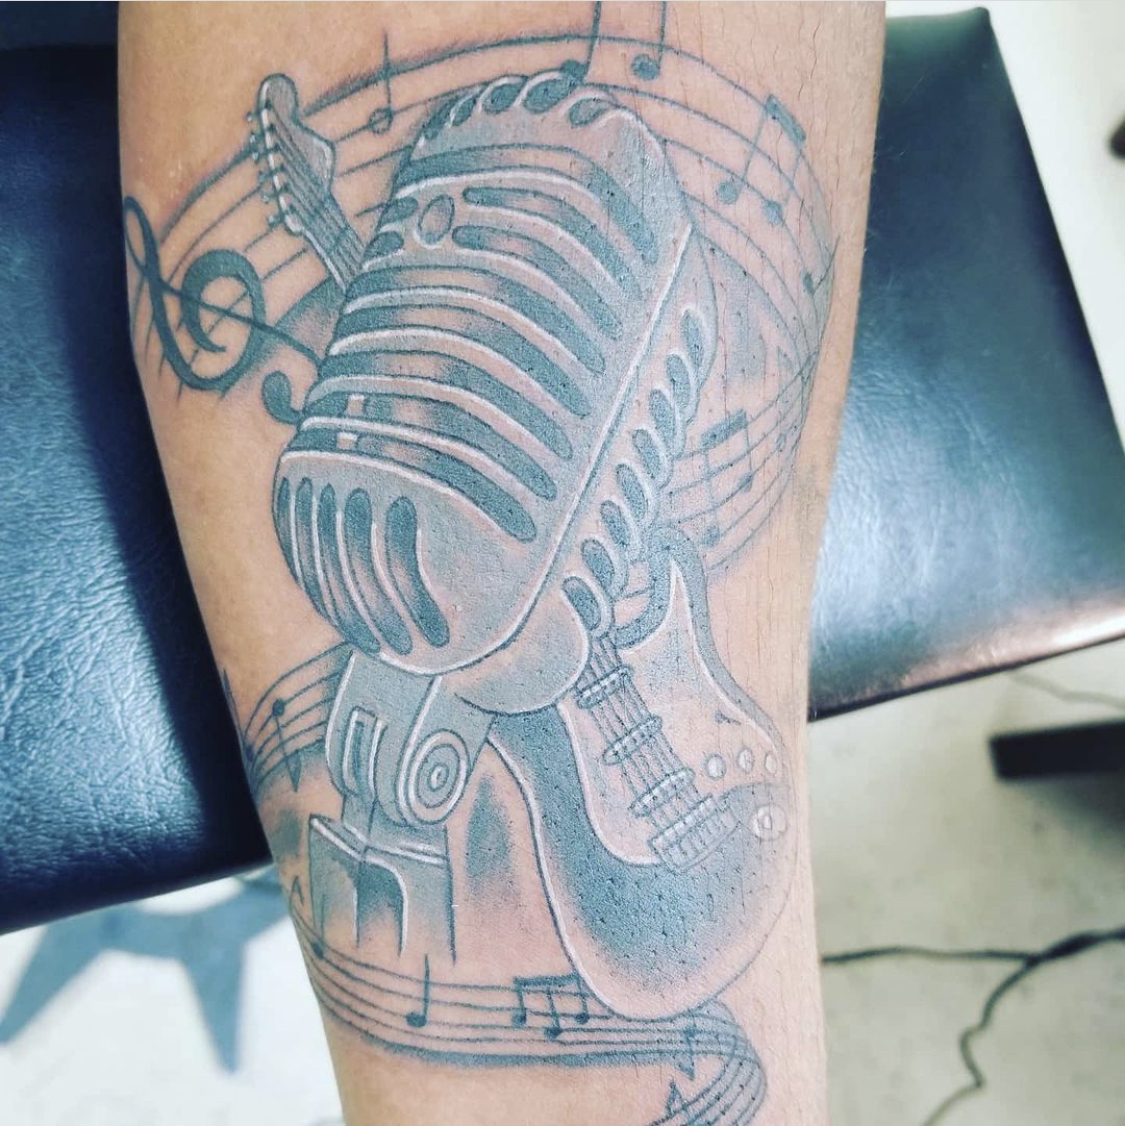 microphone tattoo | Microphone tattoo, Music tattoos, Tattoos with meaning